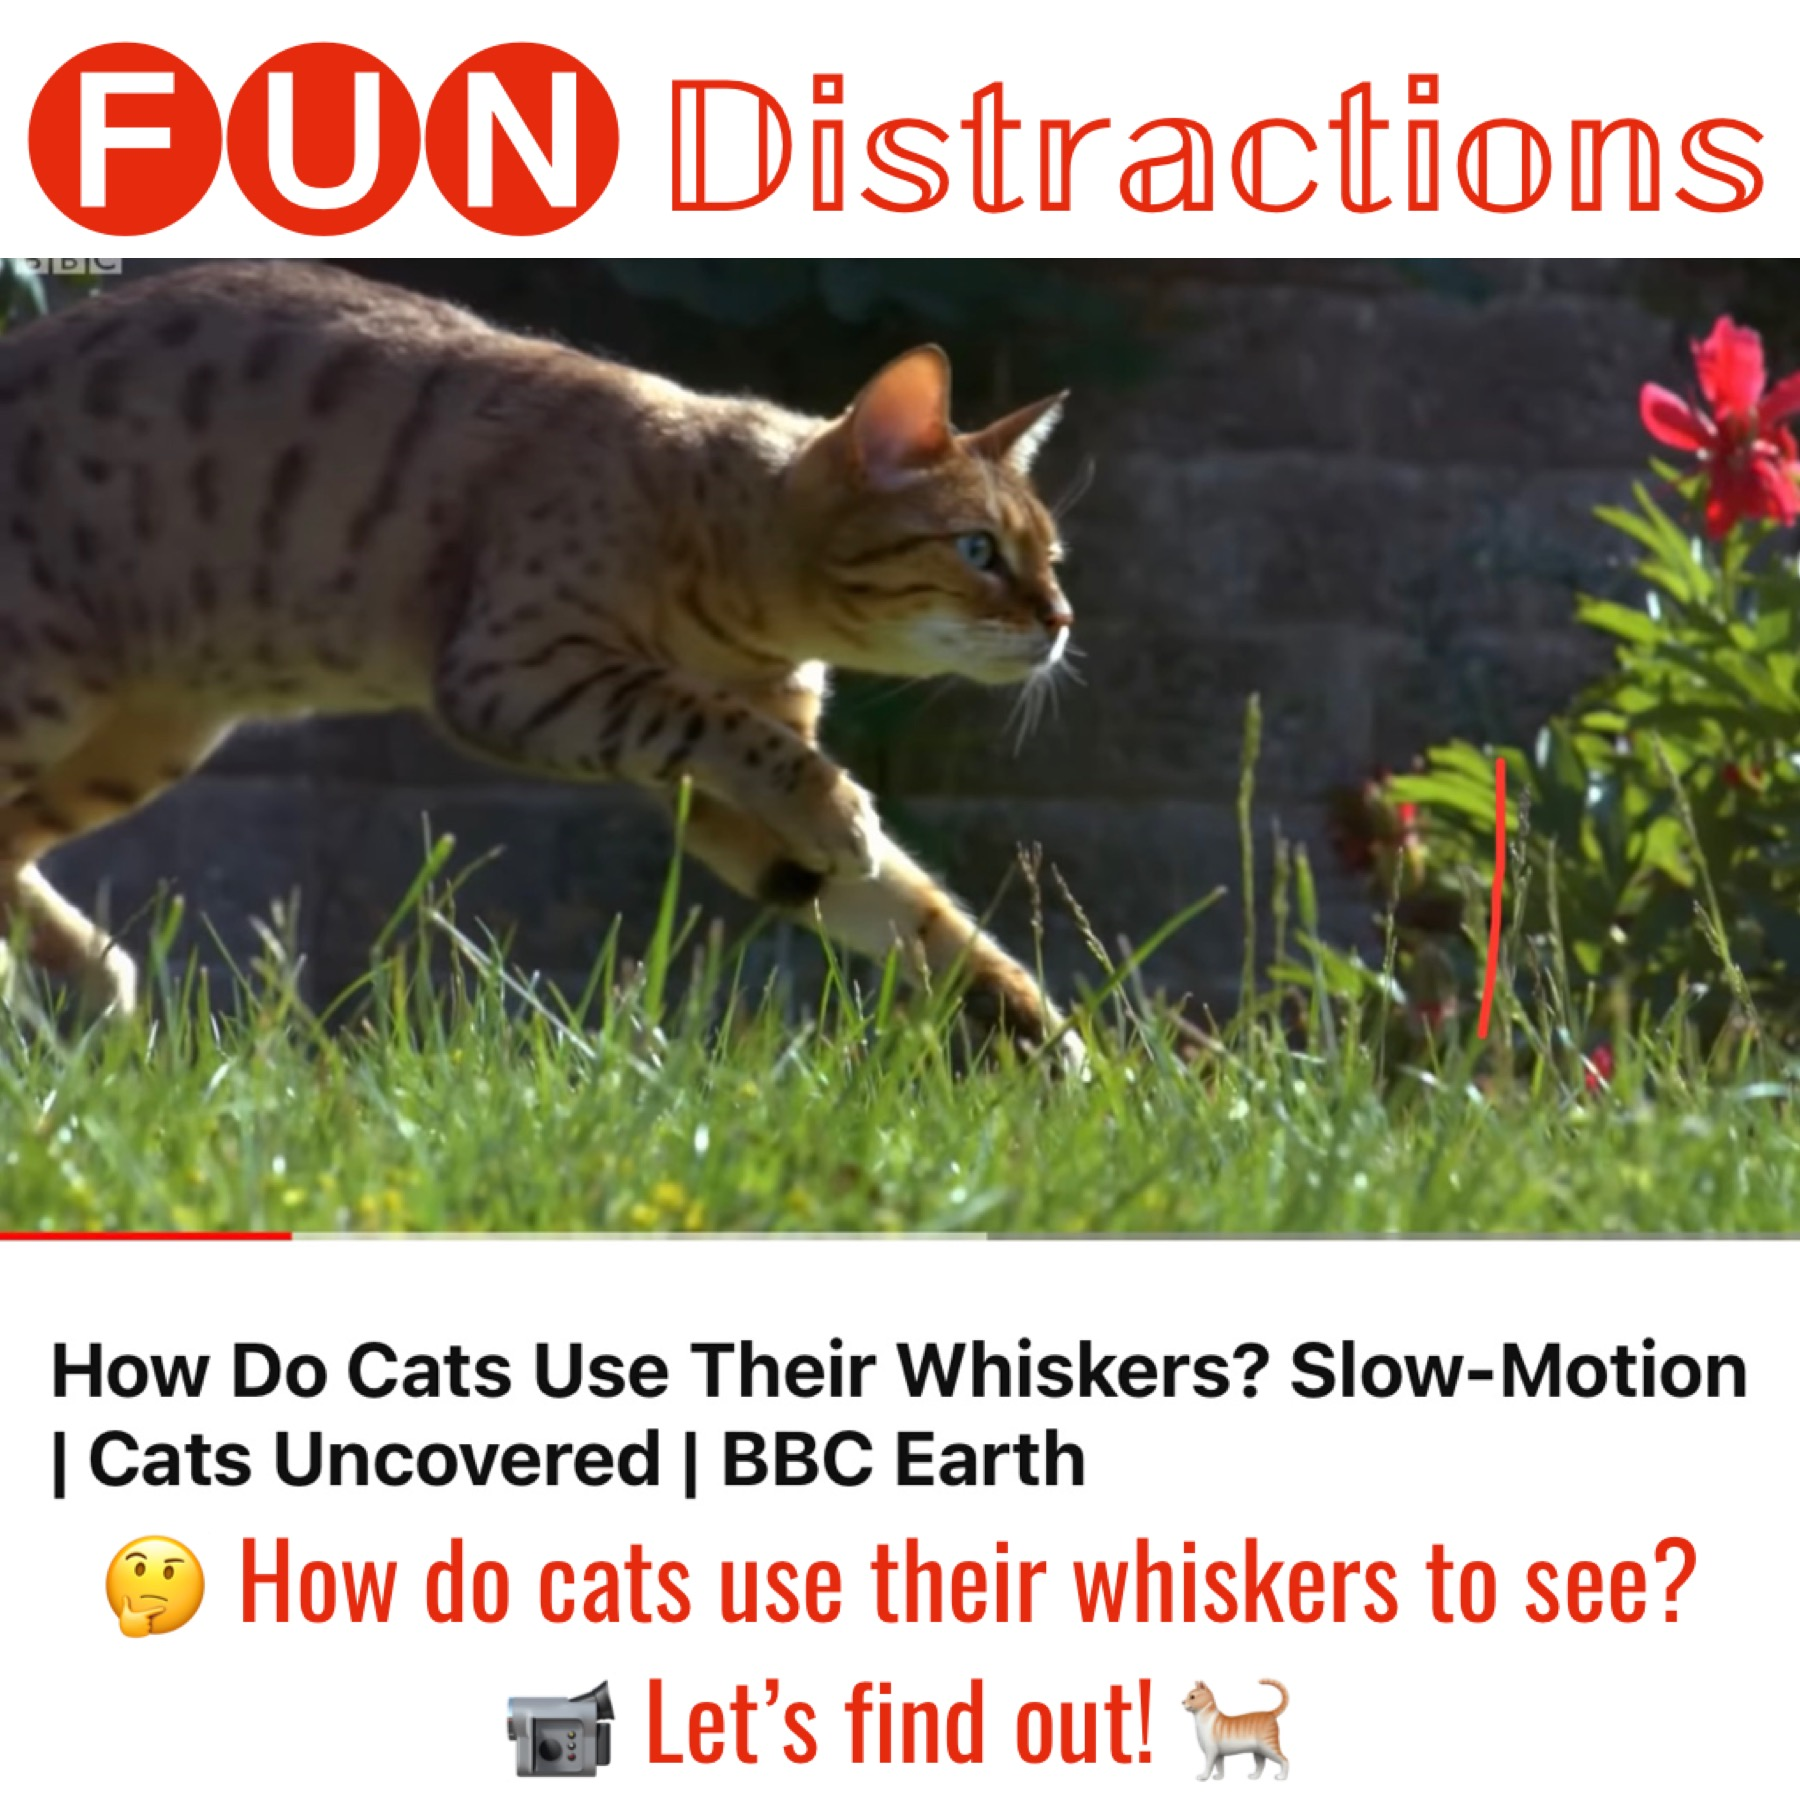 Image of a cat with question "How do cats use their whiskers?"